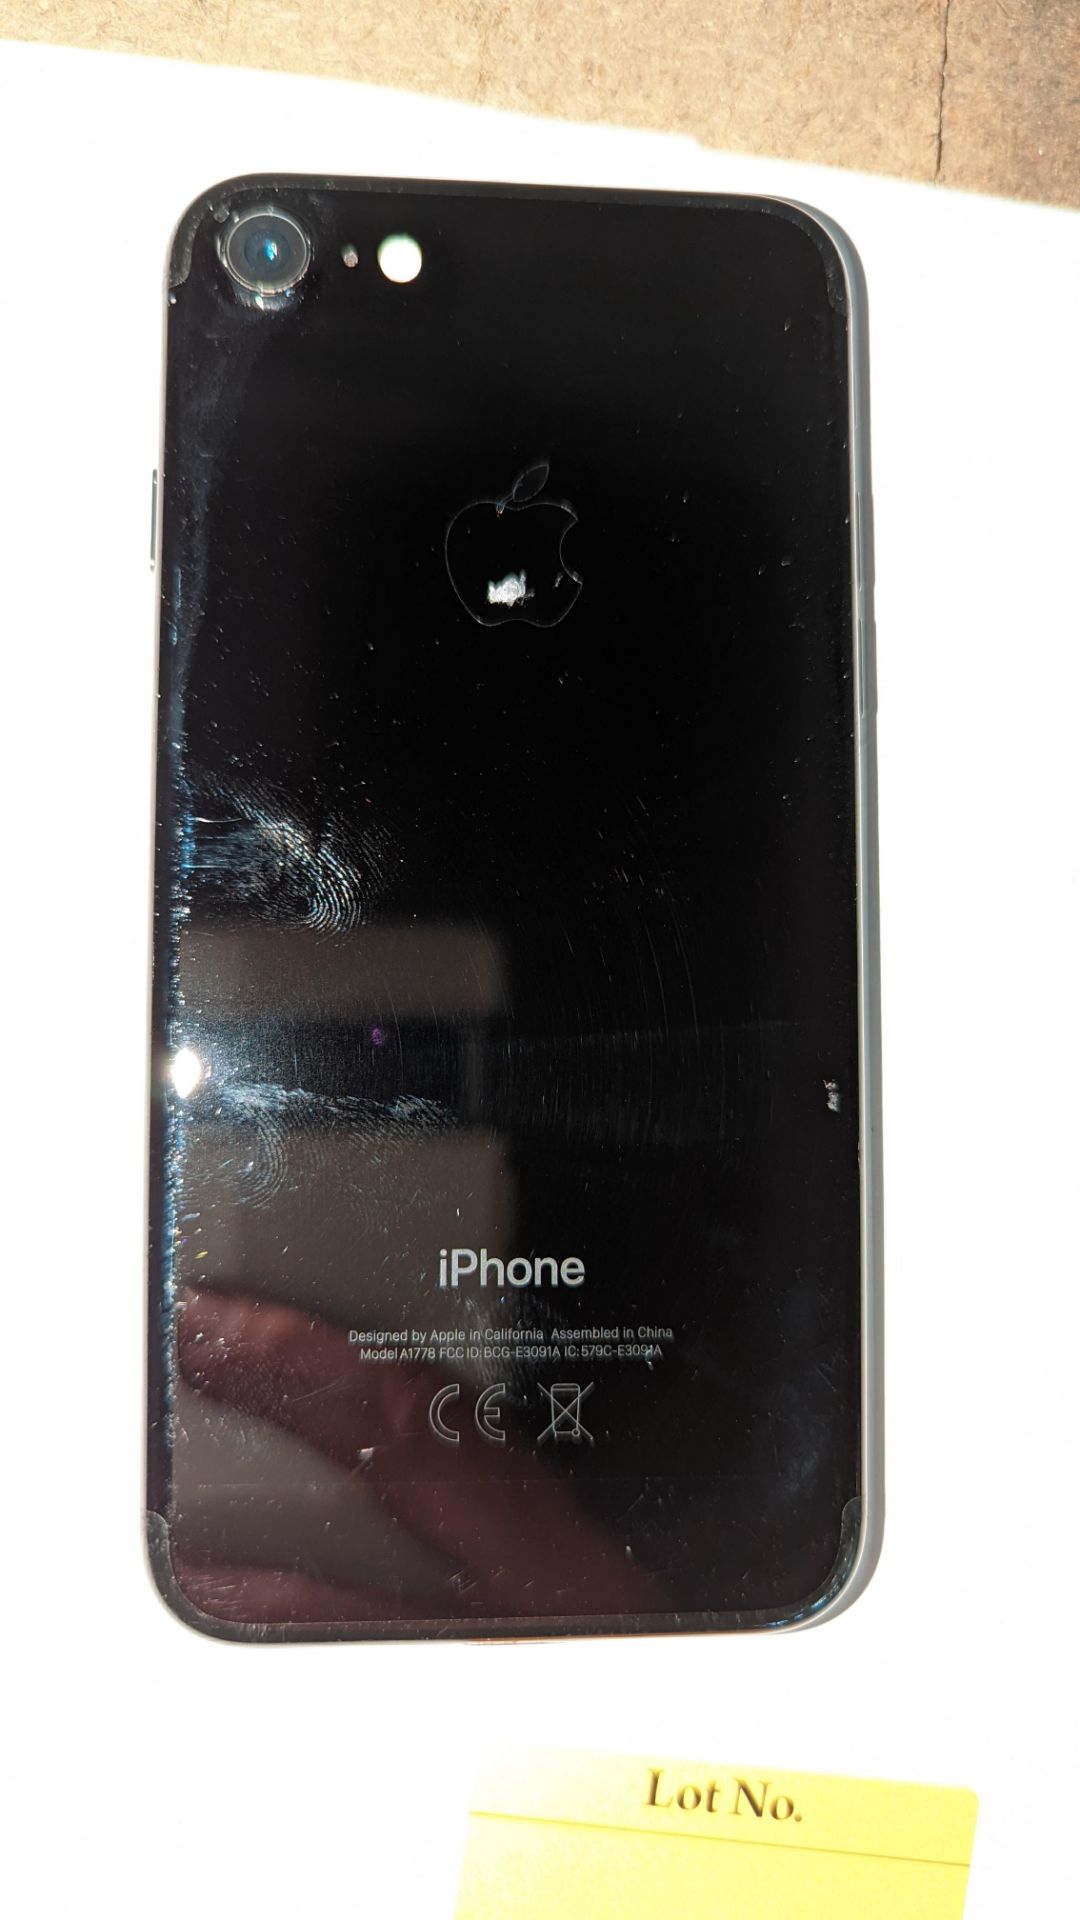 Apple iPhone 7, 32GB capacity, model A1778. No ancillaries or accessories - Image 8 of 11